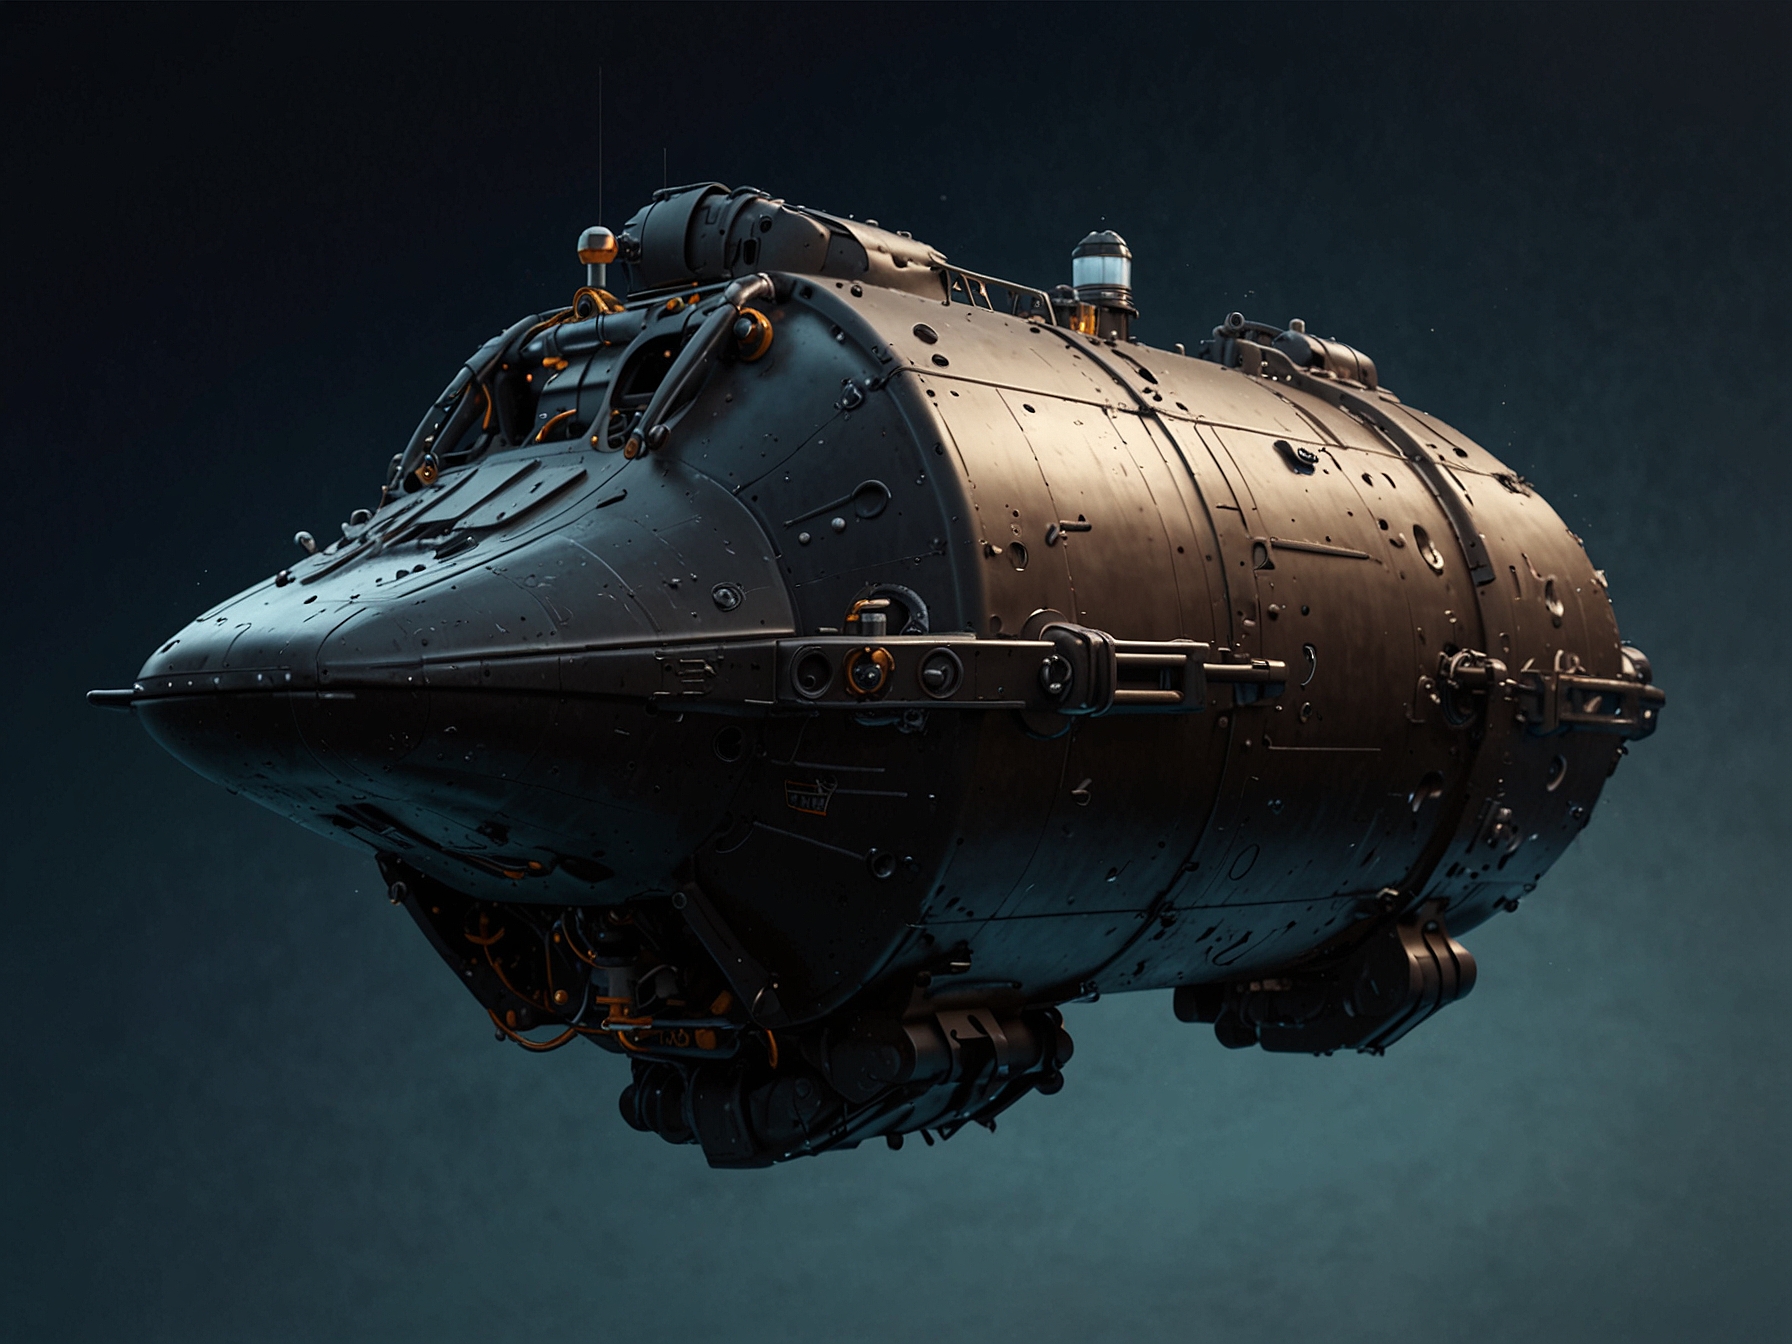 Illustration of an advanced submersible made with resilient composite materials, equipped with AI-driven systems, symbolizing innovation in deep-sea exploration post-Titan tragedy.